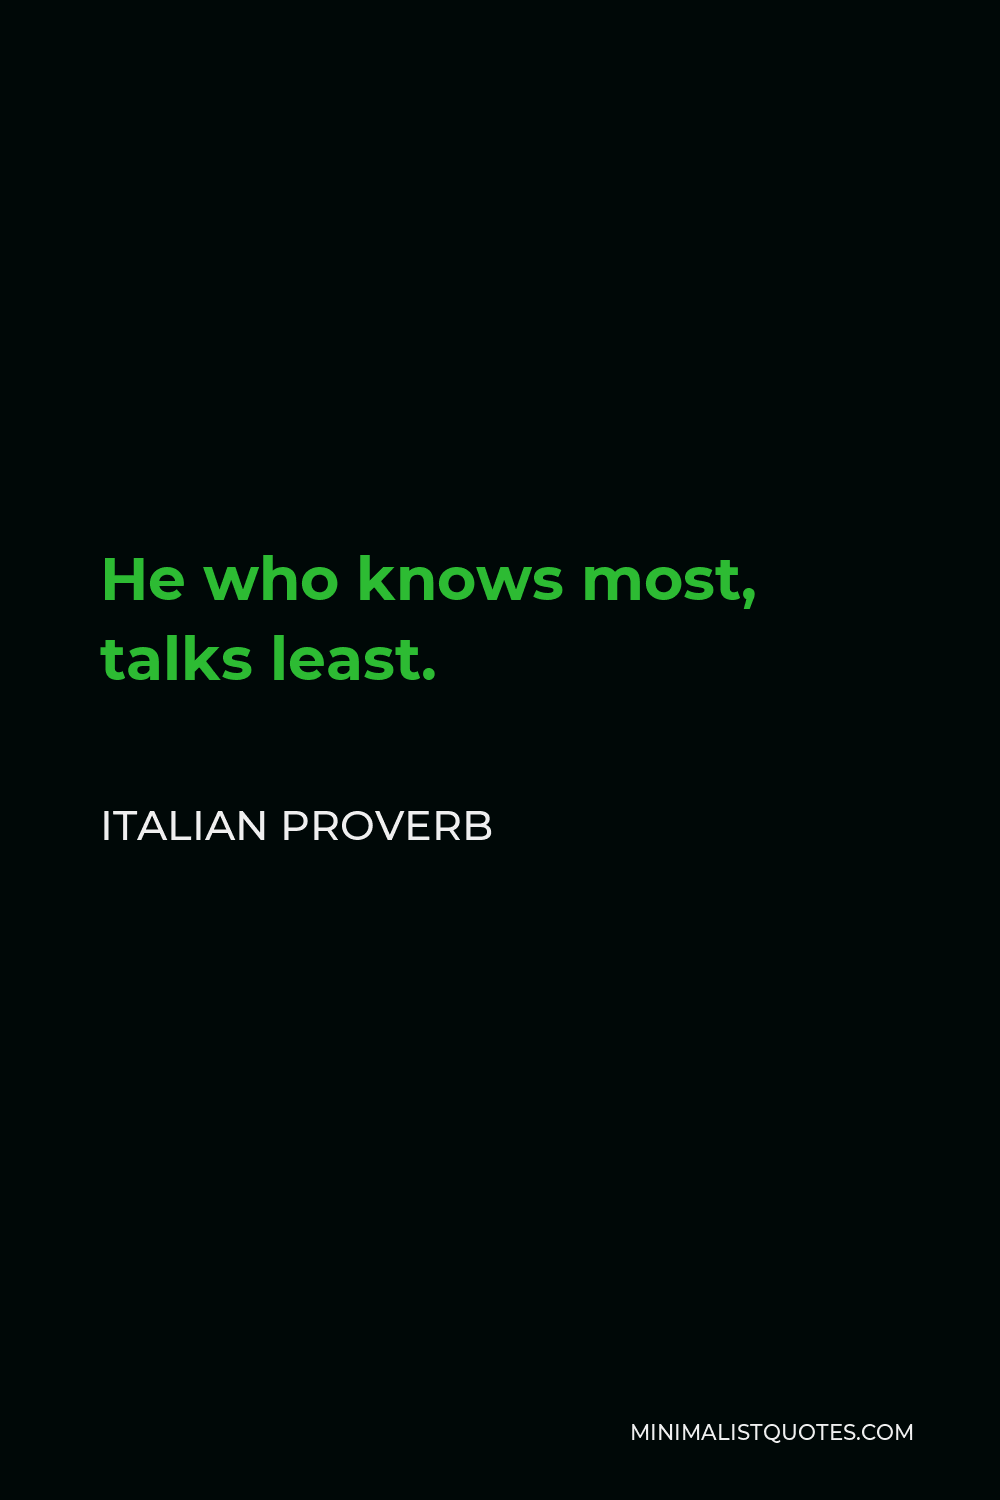 Italian Proverb Quote - He who knows most, talks least.